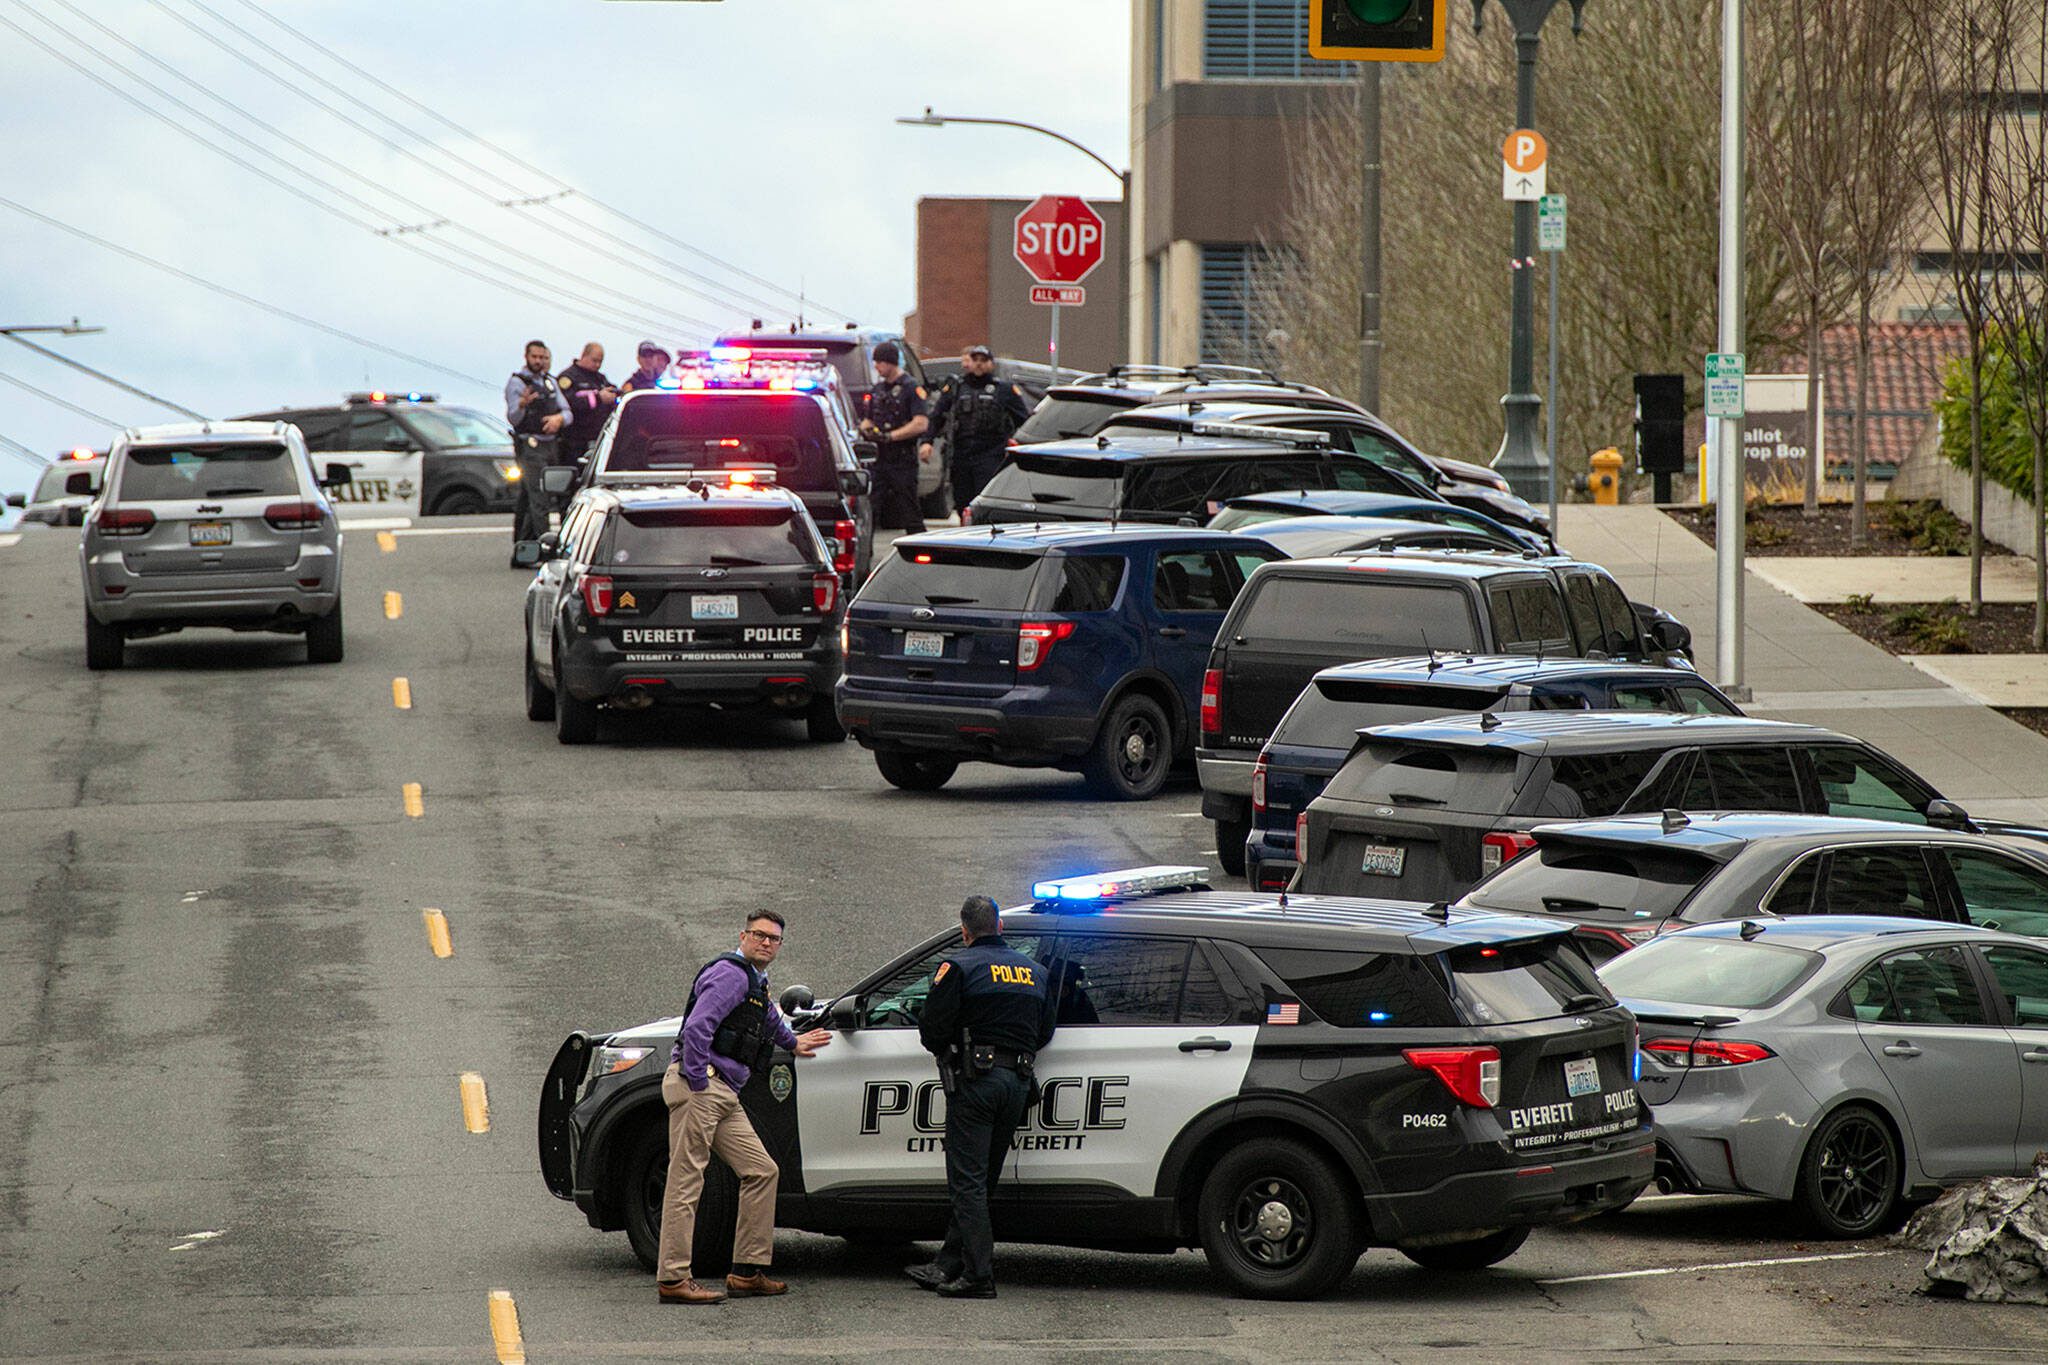 Law enforcement and police vehicles fill Wall Street after reports of an armed person inside the Snohomish County Superior Courthouse Monday, Dec. 12, 2022, in downtown Everett, Washington. (Ryan Berry / The Herald)